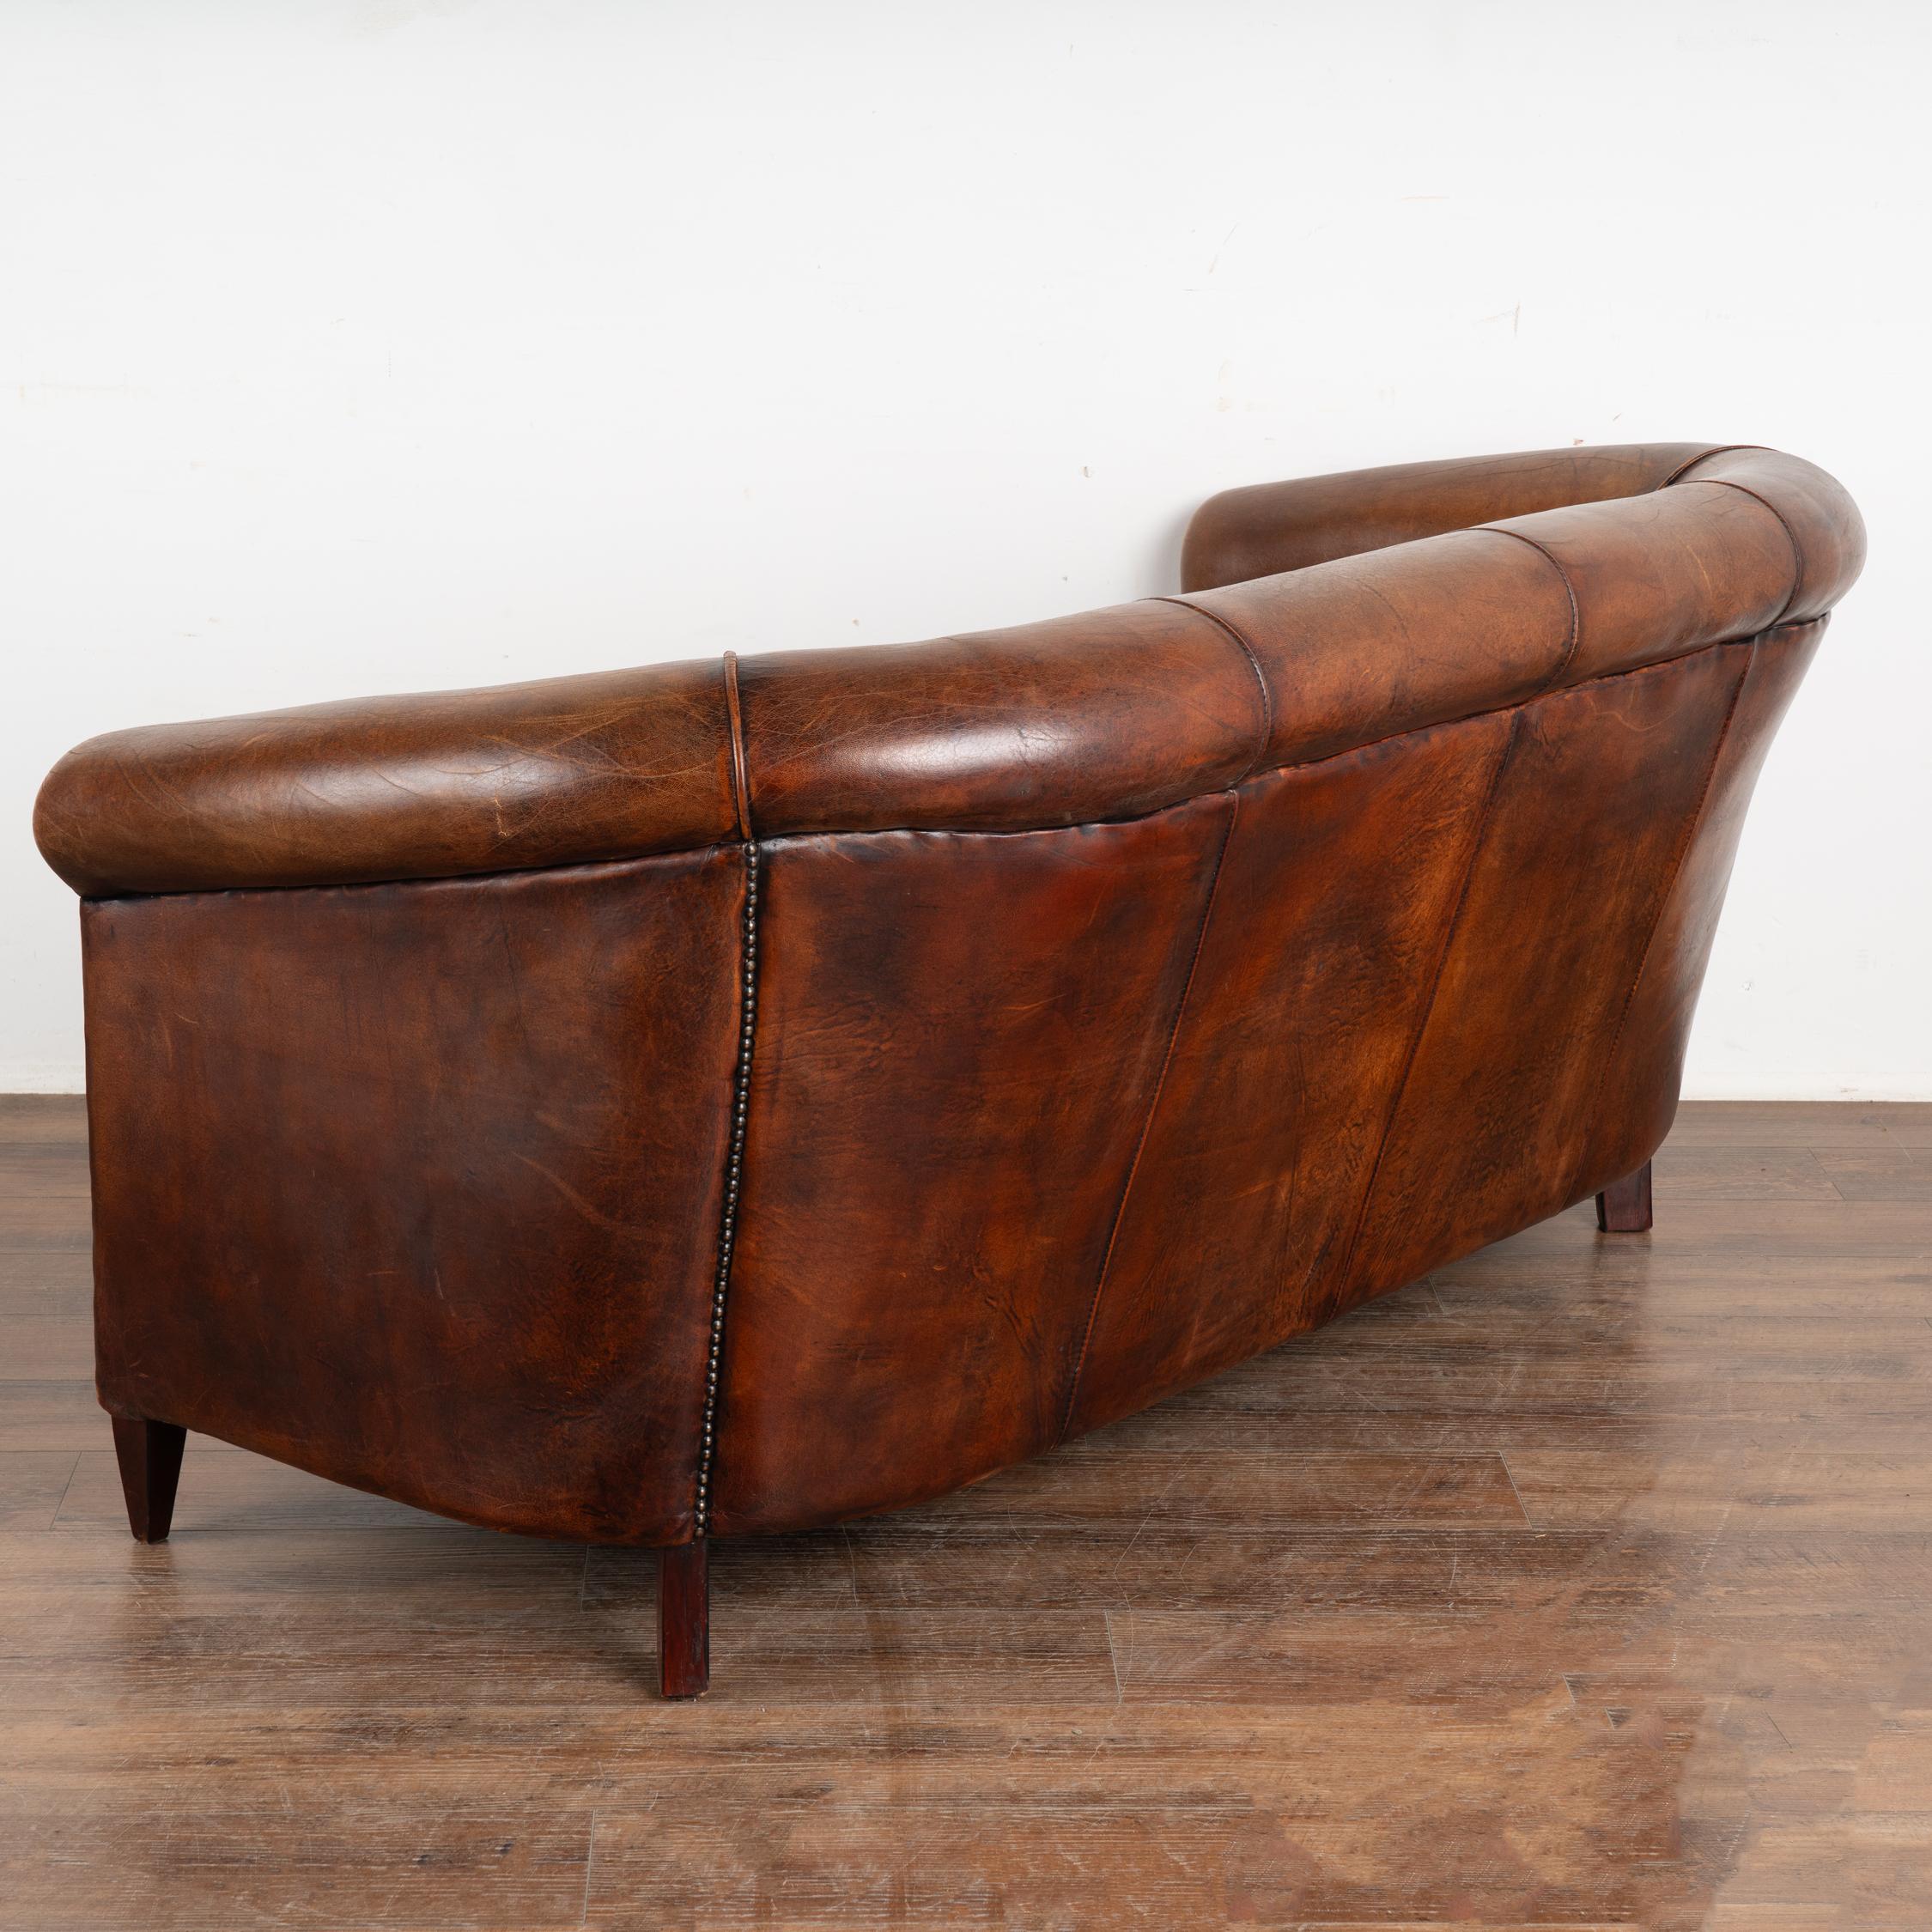 Vintage Brown Leather 2-Seat Sofa Loveseat from The Netherlands, circa 1960-70 5